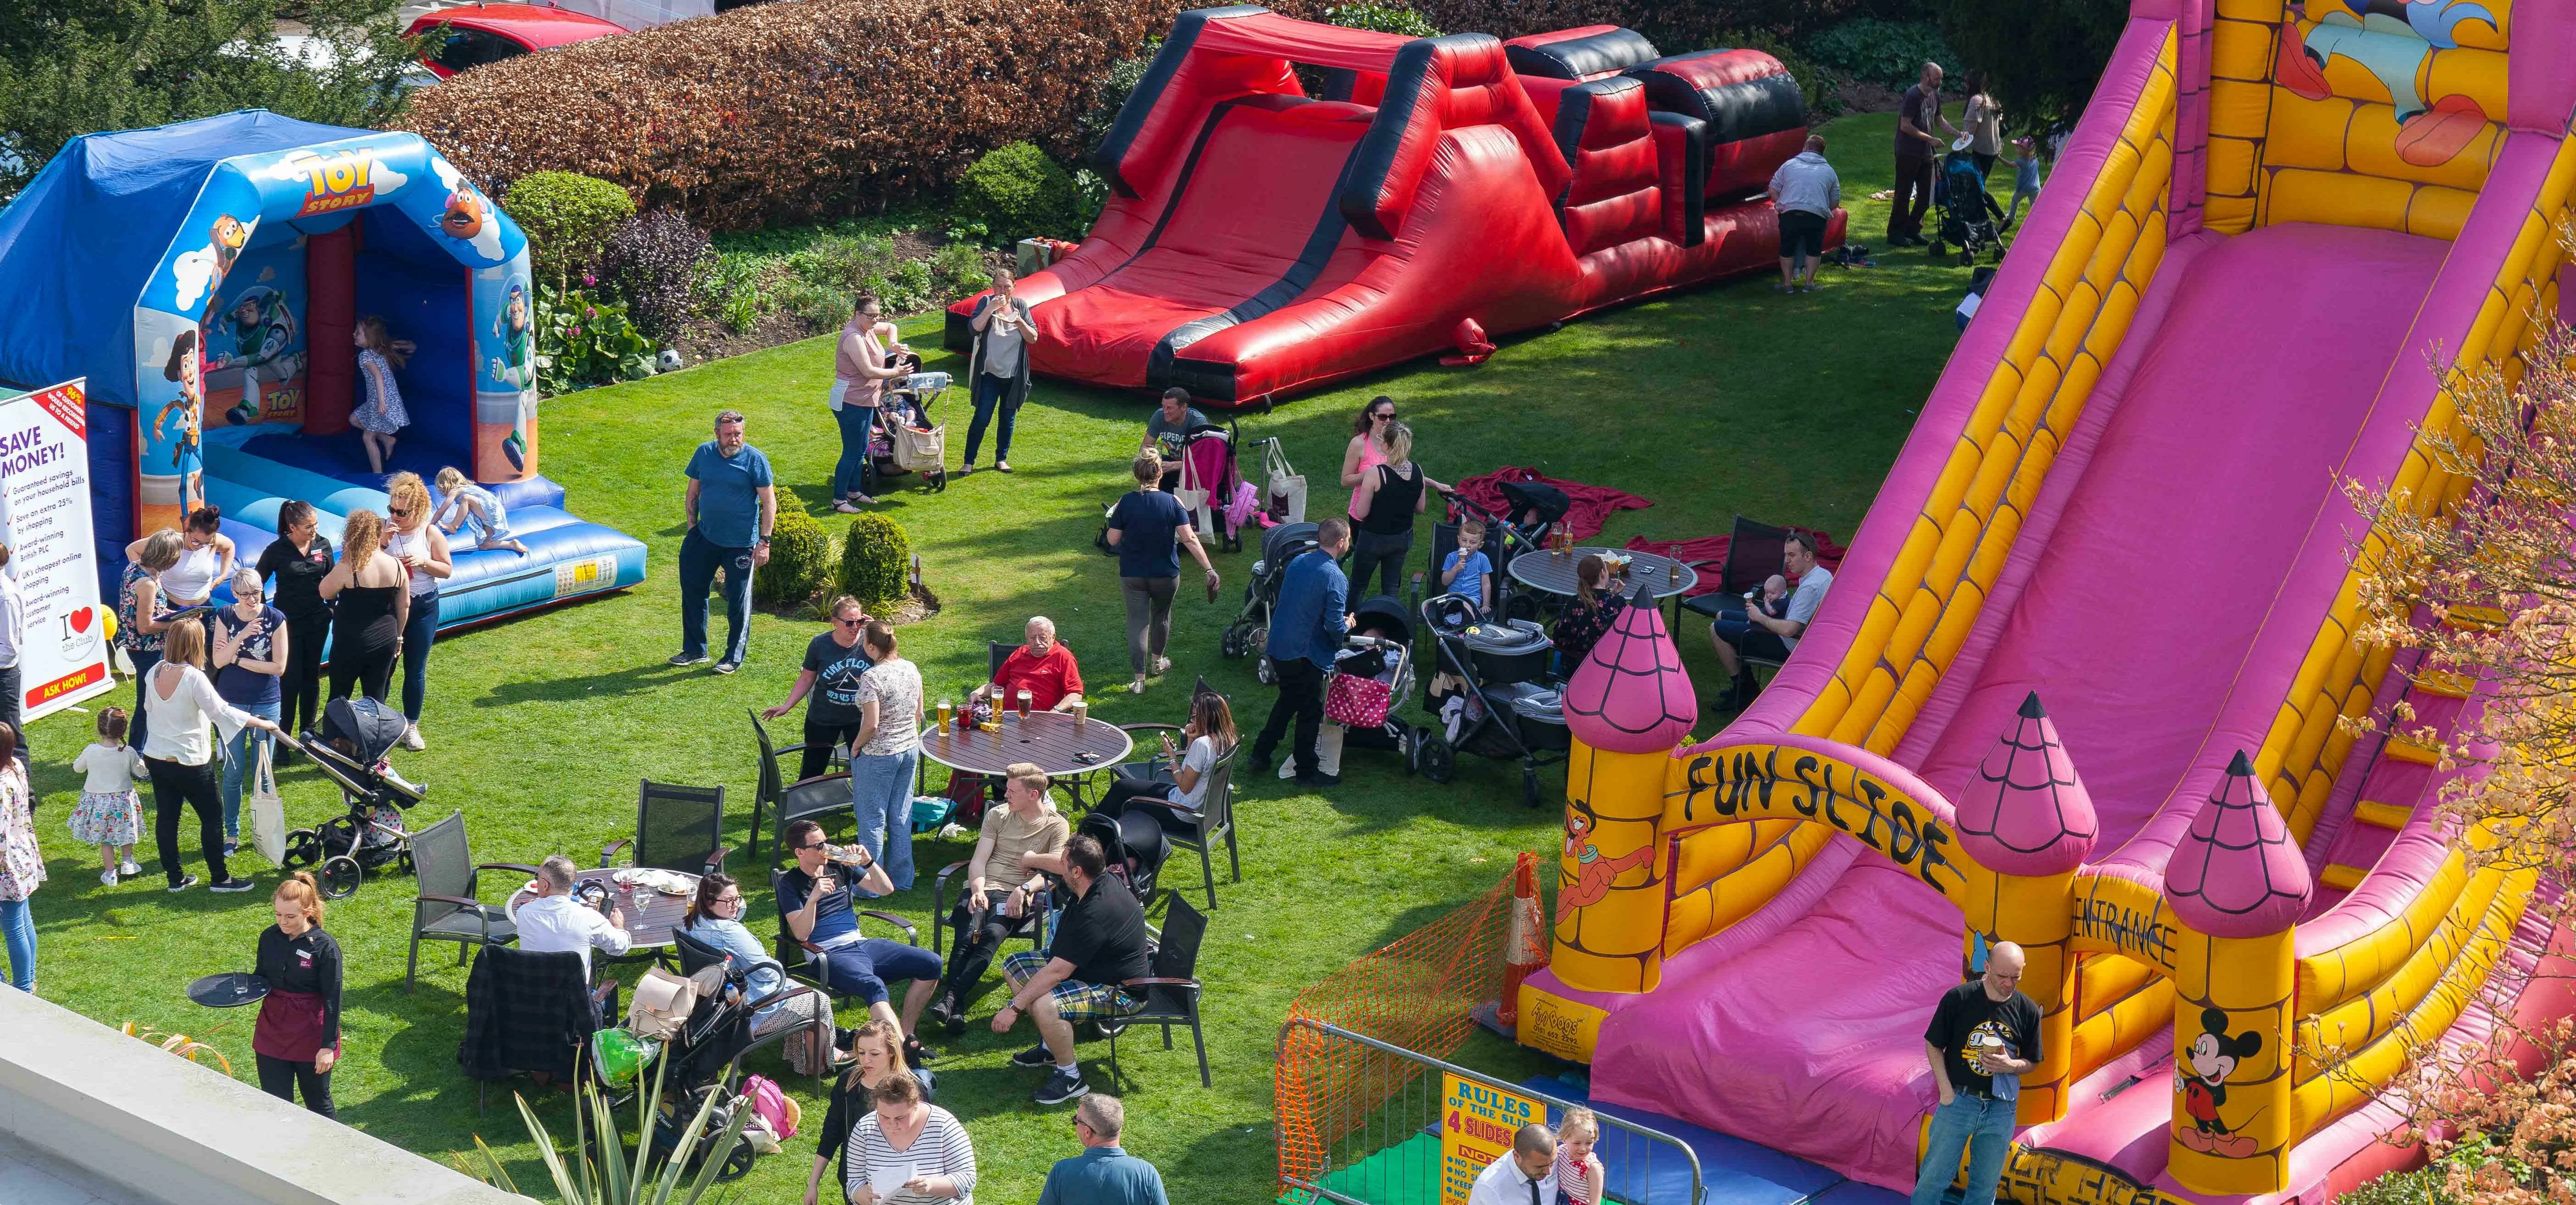  Best Western PLUS Pinewood on Wilmslow Hotel’s Easter Family Fun Day